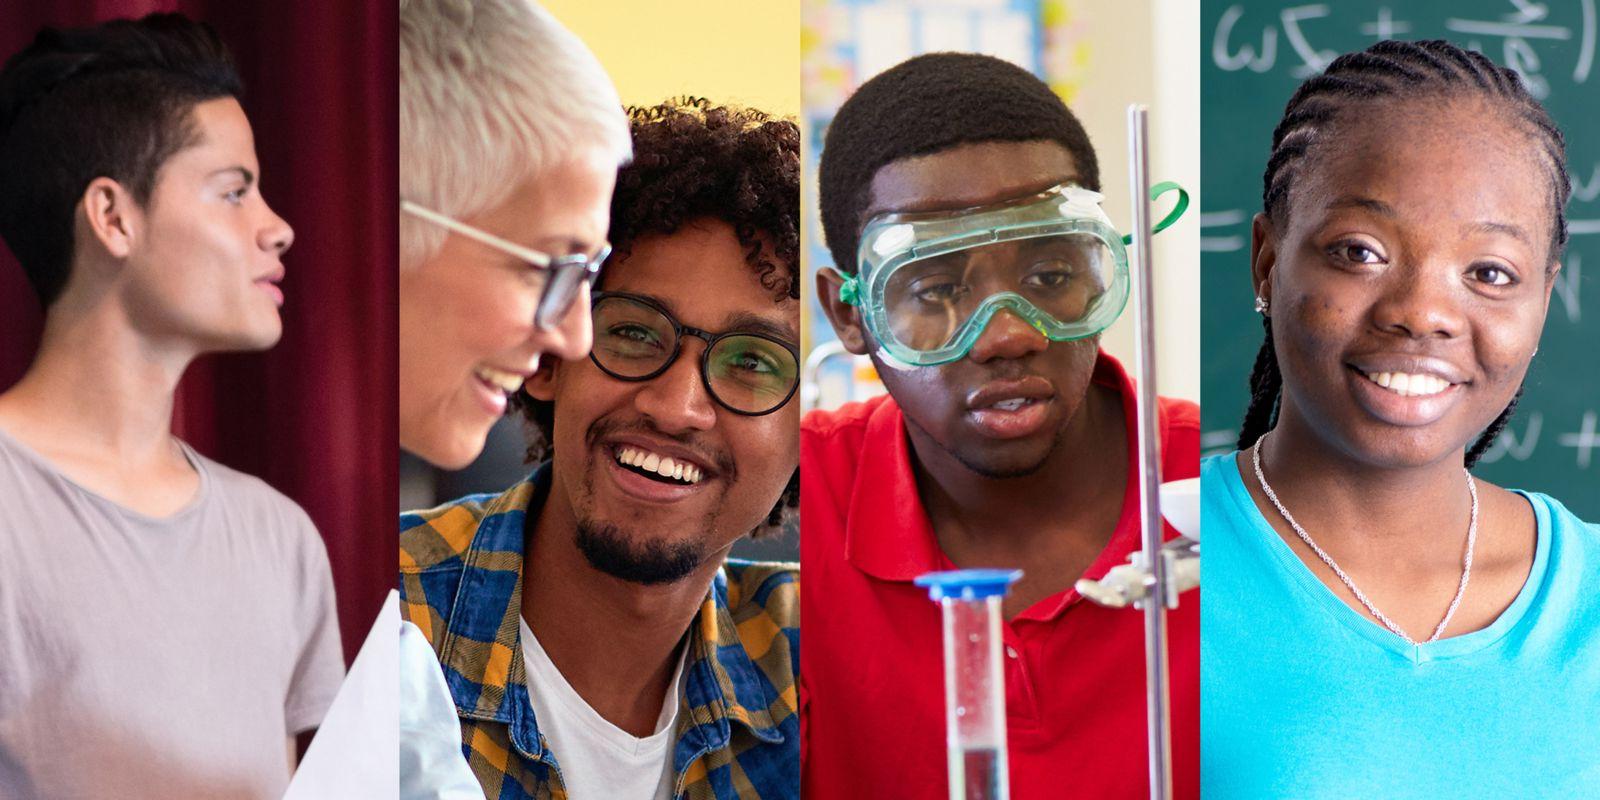 Four images representing Mathematics, Science, English, and the Arts. An African American female smiles and stands in front of a chalkboard with equations written on it wearing a teal v-neck shirt and a silver necklace. An African American male wearing goggles along with a red polo shirt and using science implements represents science. English is represented by a Latino male wearing glasses with a blue and yellow plaid shirt over a white t-shirt smiling at his instructor a Caucasian female with white hair and glasses wearing a white shirt. A Caucasian male wearing ballet clothes standing on a stage and reading a scrip represents the arts.